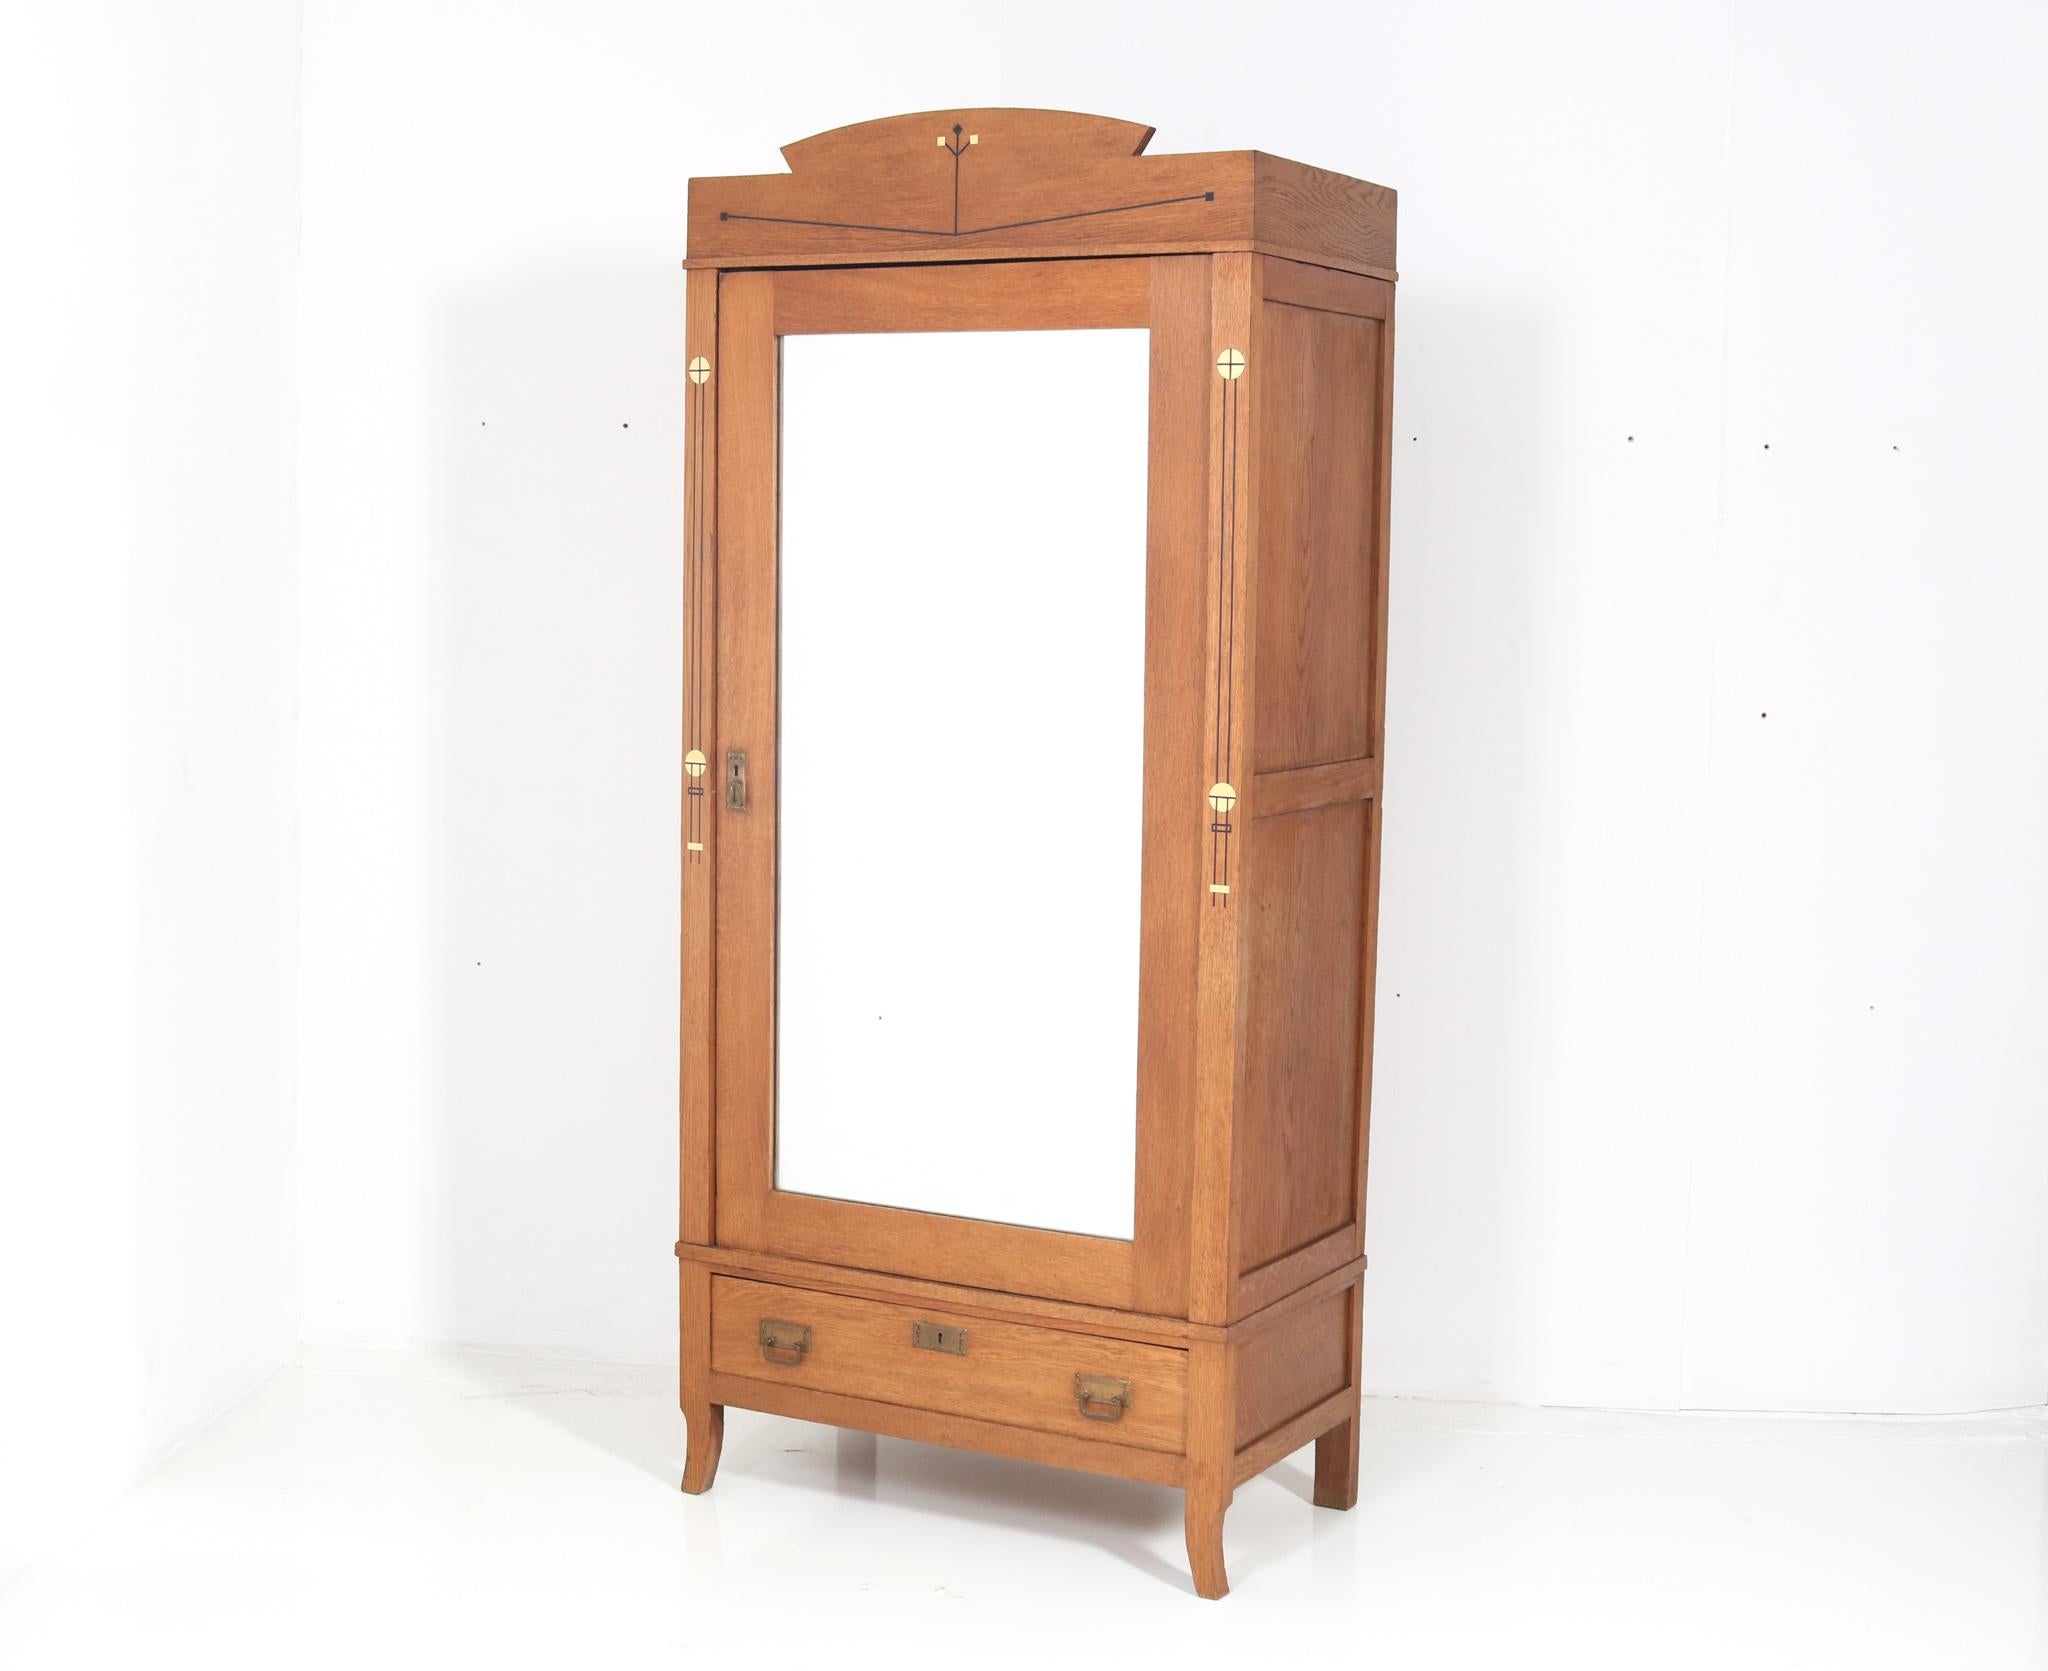 Magnificent and rare Arts & Crafts Art Nouveau armoire or wardrobe.
Striking Dutch design from the 1900s.
Solid oak with original brass handles on door and drawer.
Four original solid oak shelves adjustable in height.
The door has the original